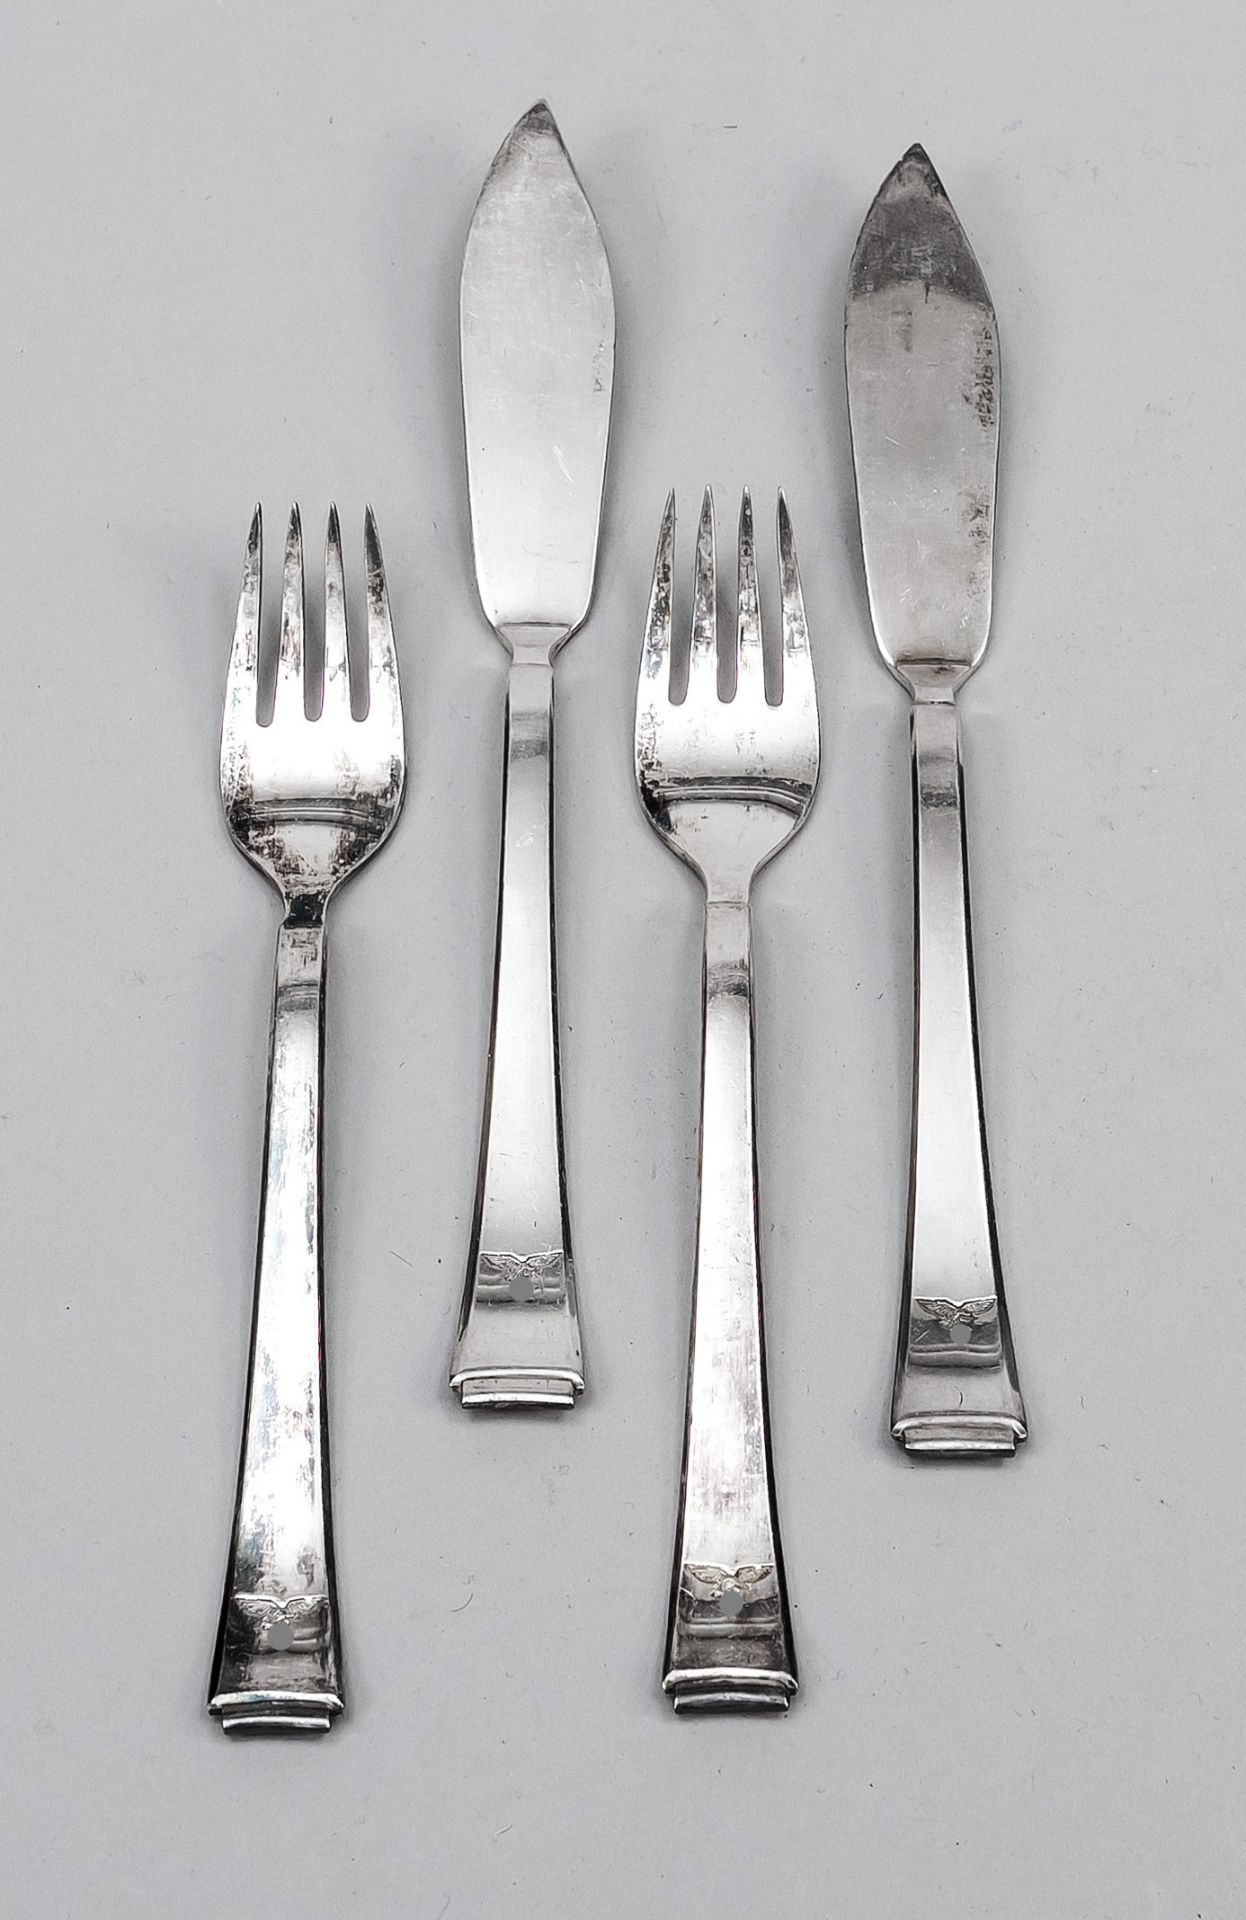 Luftwaffe fish cutlery for 6 persons, probably 1st h. 20th c., silver plated metal, model 2500,